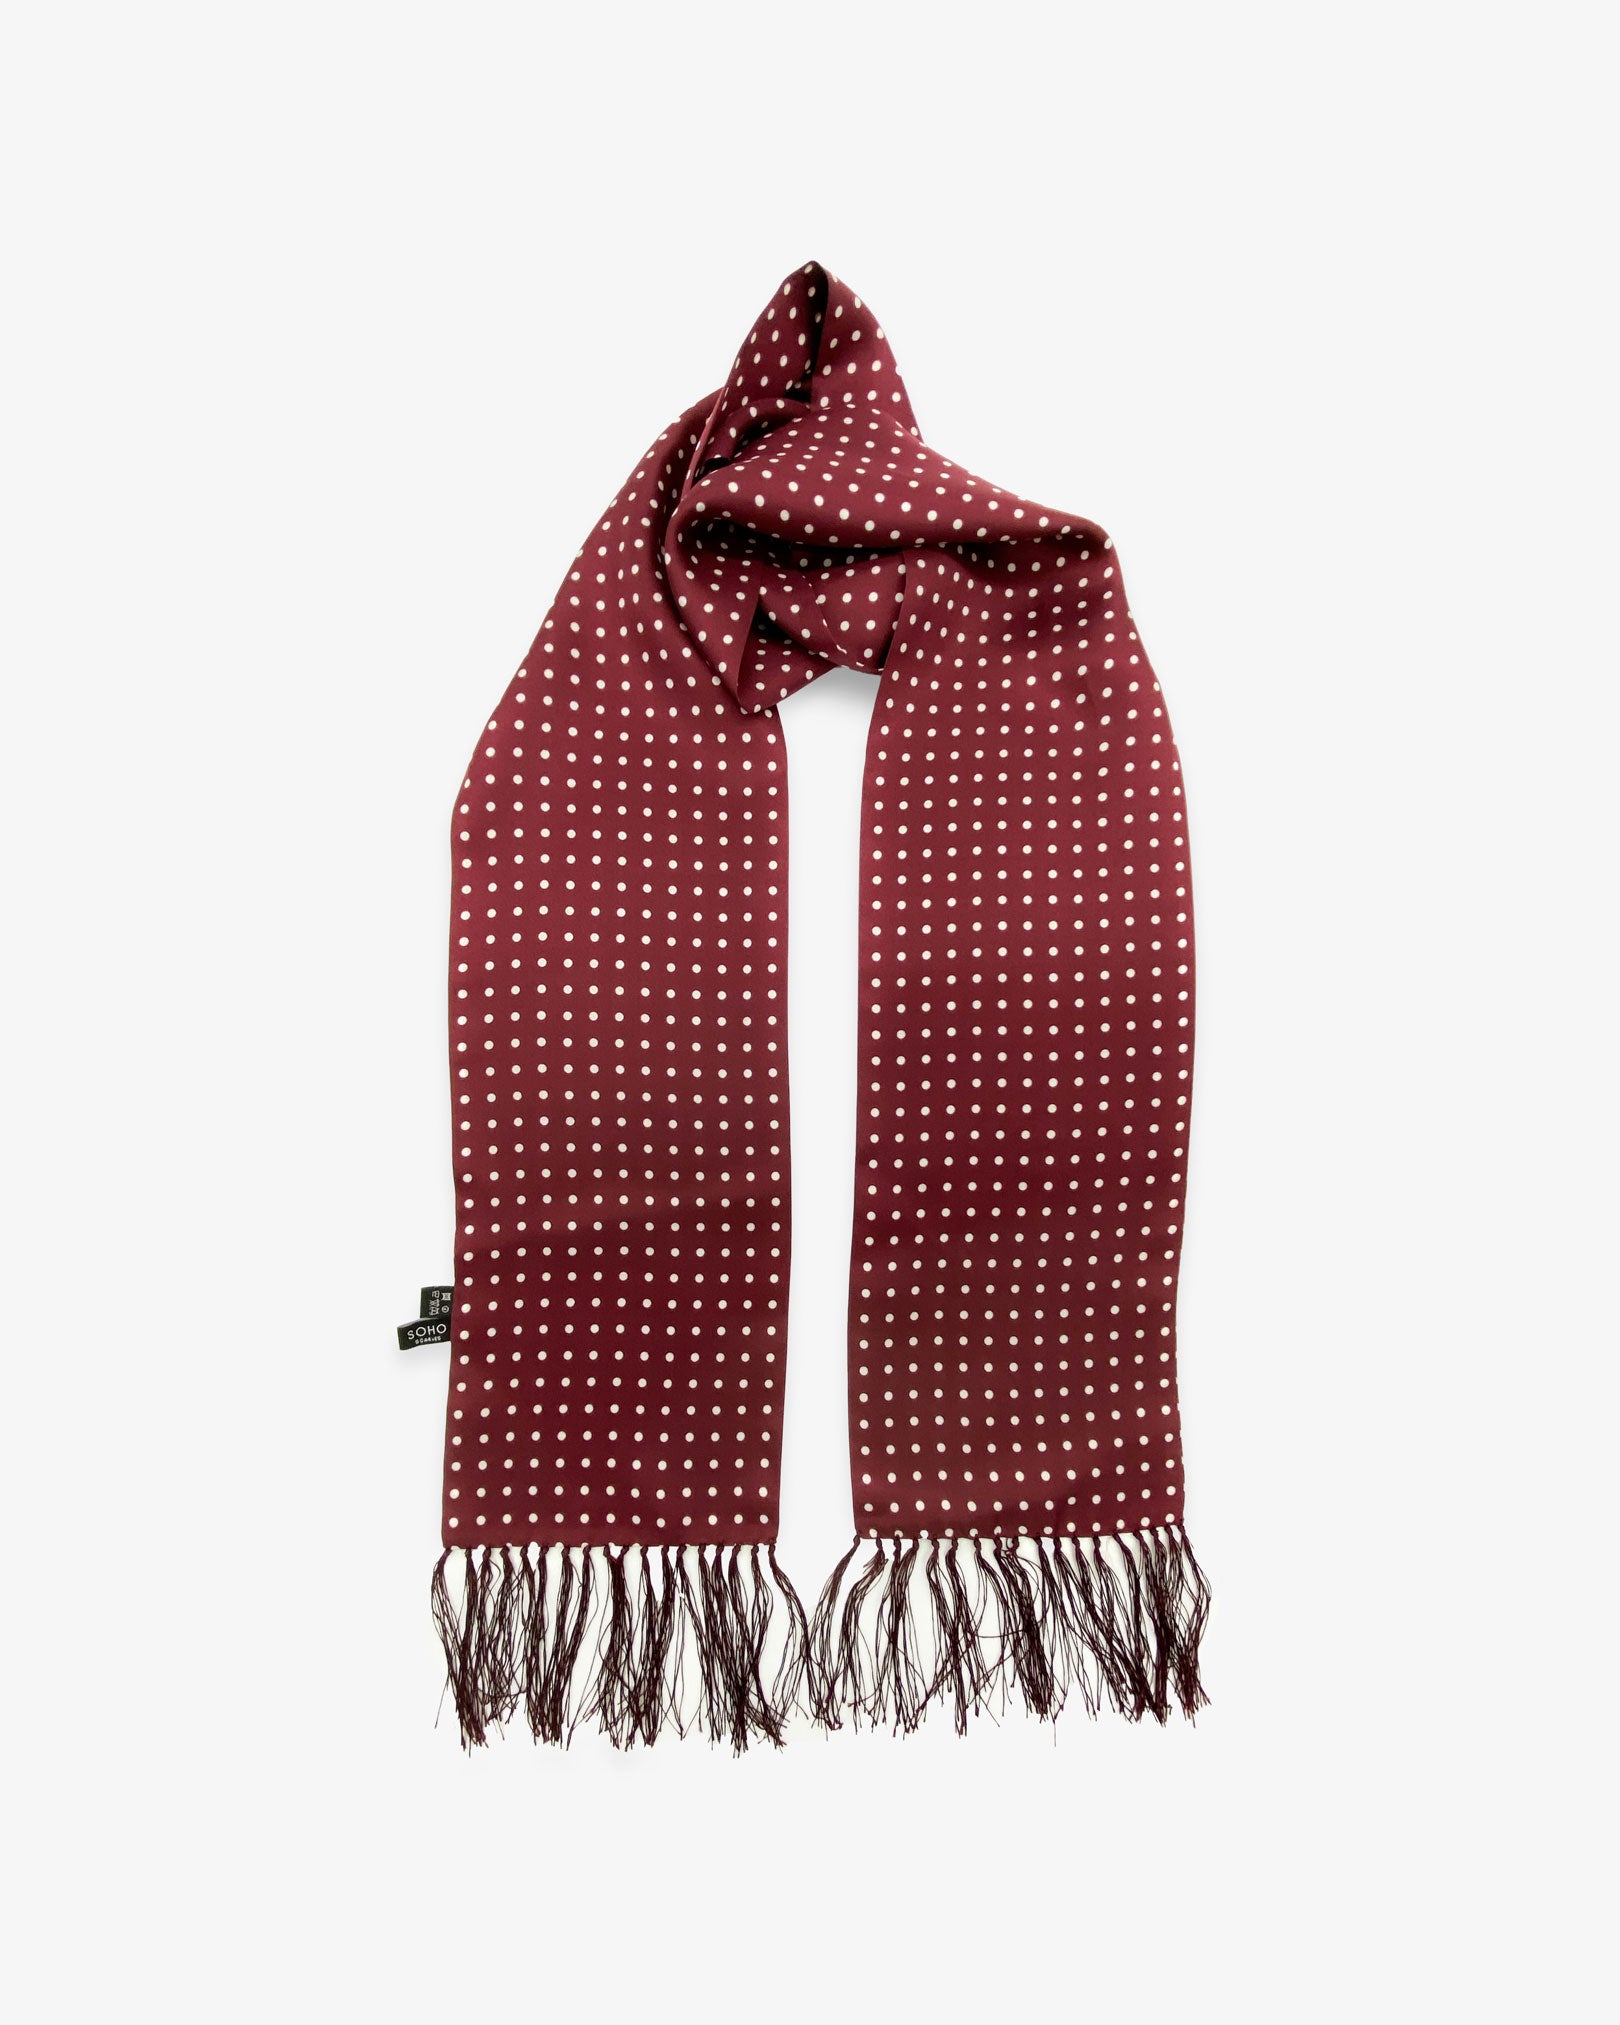 The Sapporo pure silk aviator scarf looped in middle with both ends parallel showing the polka dot design in deep maroon with white dots and matching 3-inch fringe.